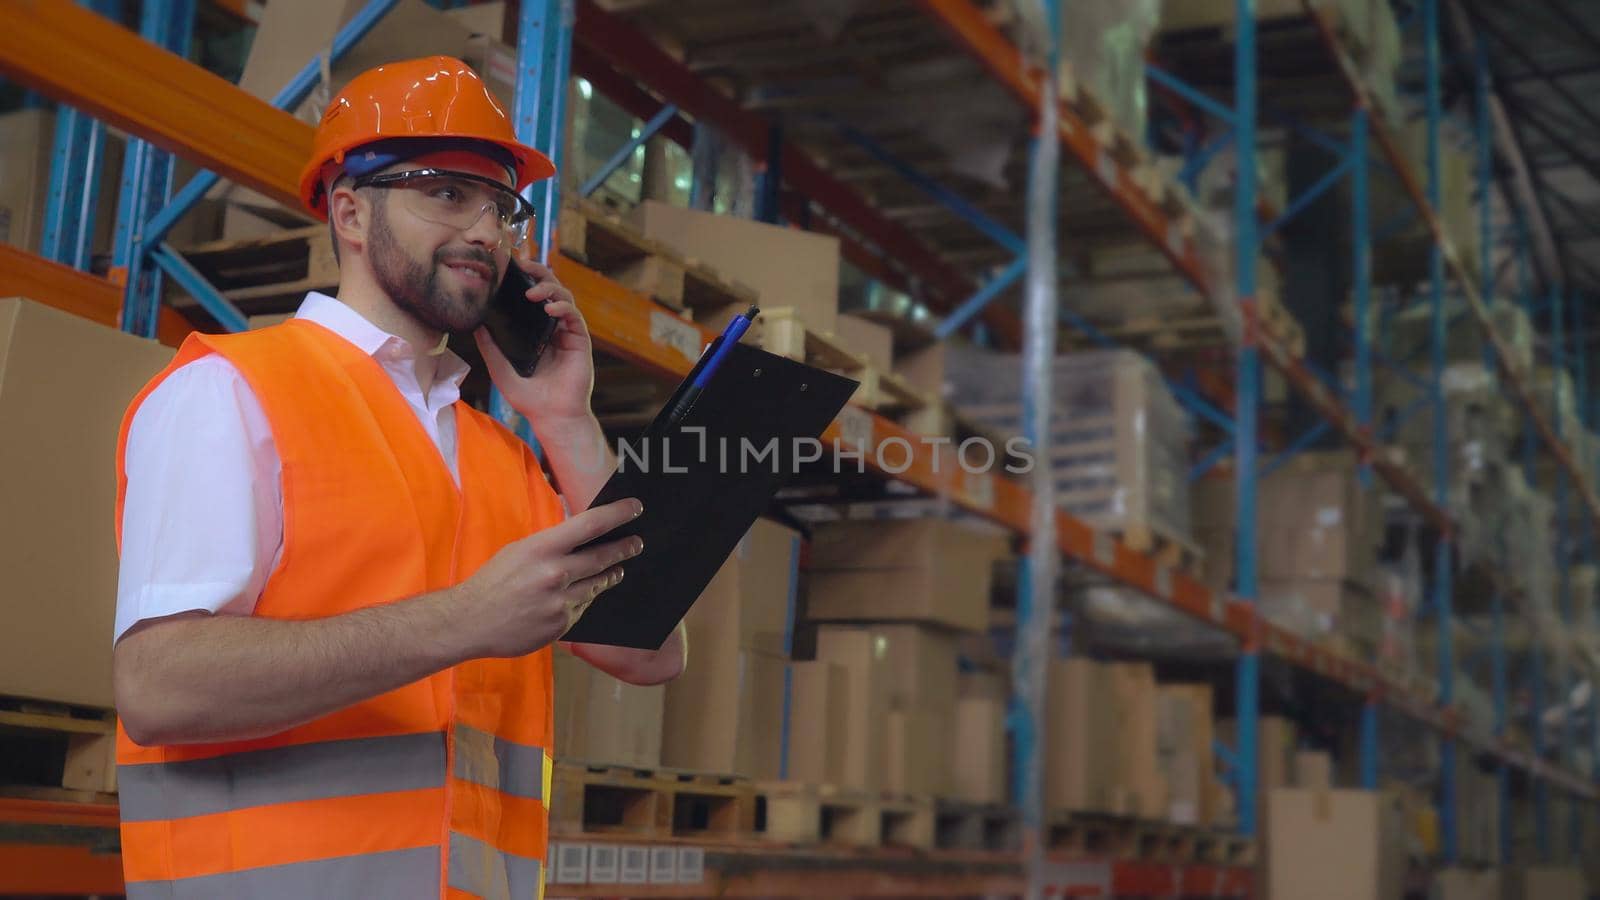 Portrait manager at work in warehouse has phone conversation with client. Handsome worker talking by smartphone discussing the logistics. Man wearing hard hat and orange vest